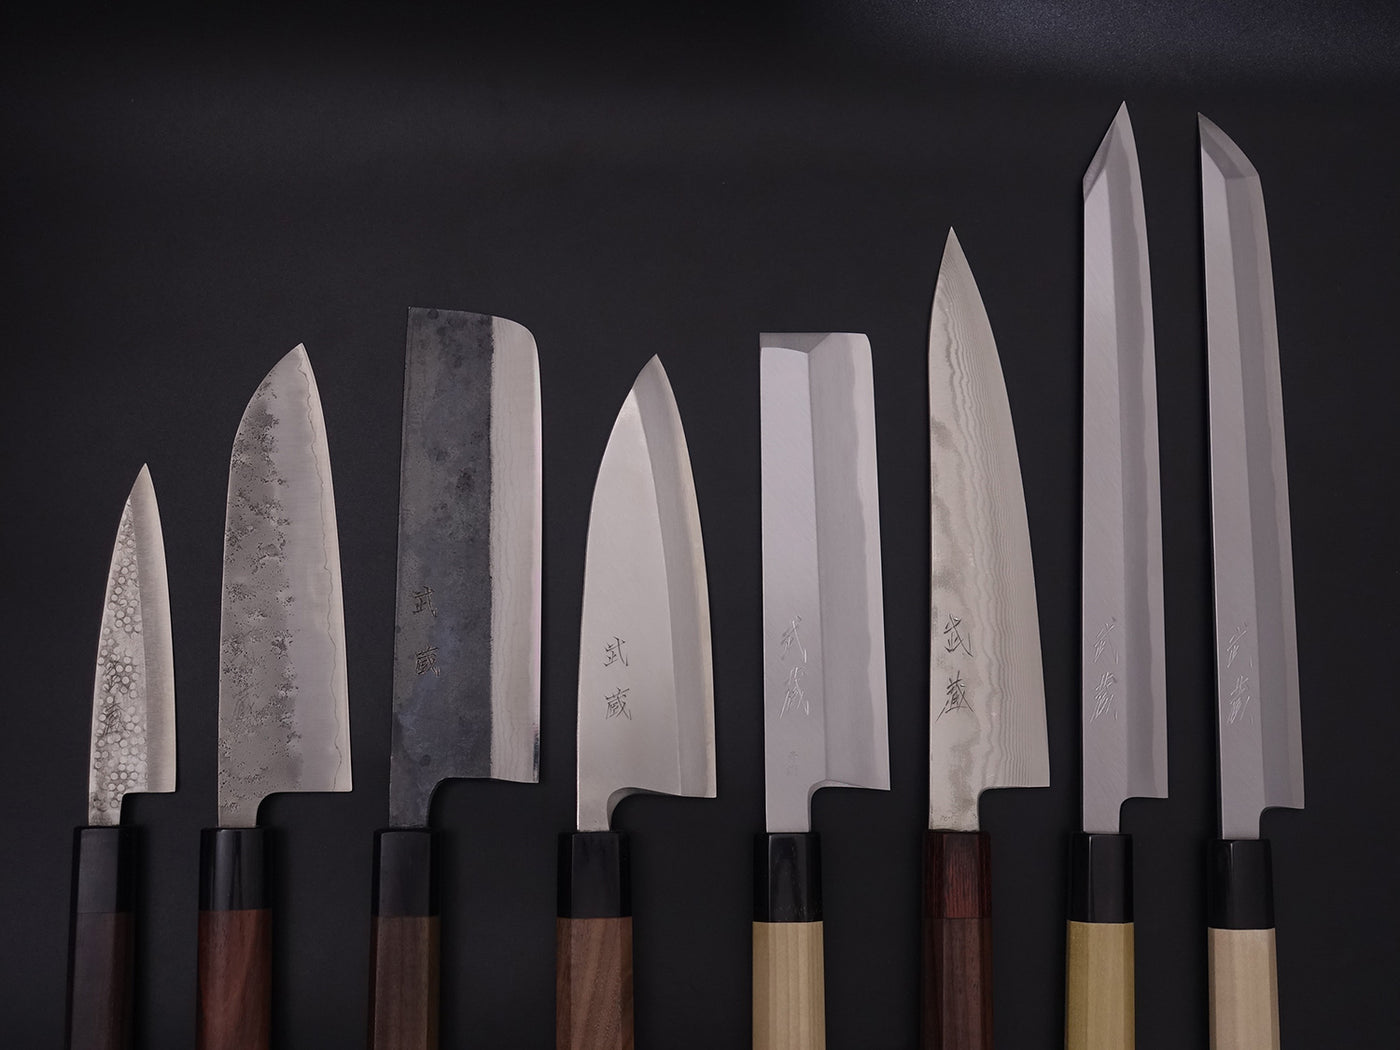 Types of Japanese Knives